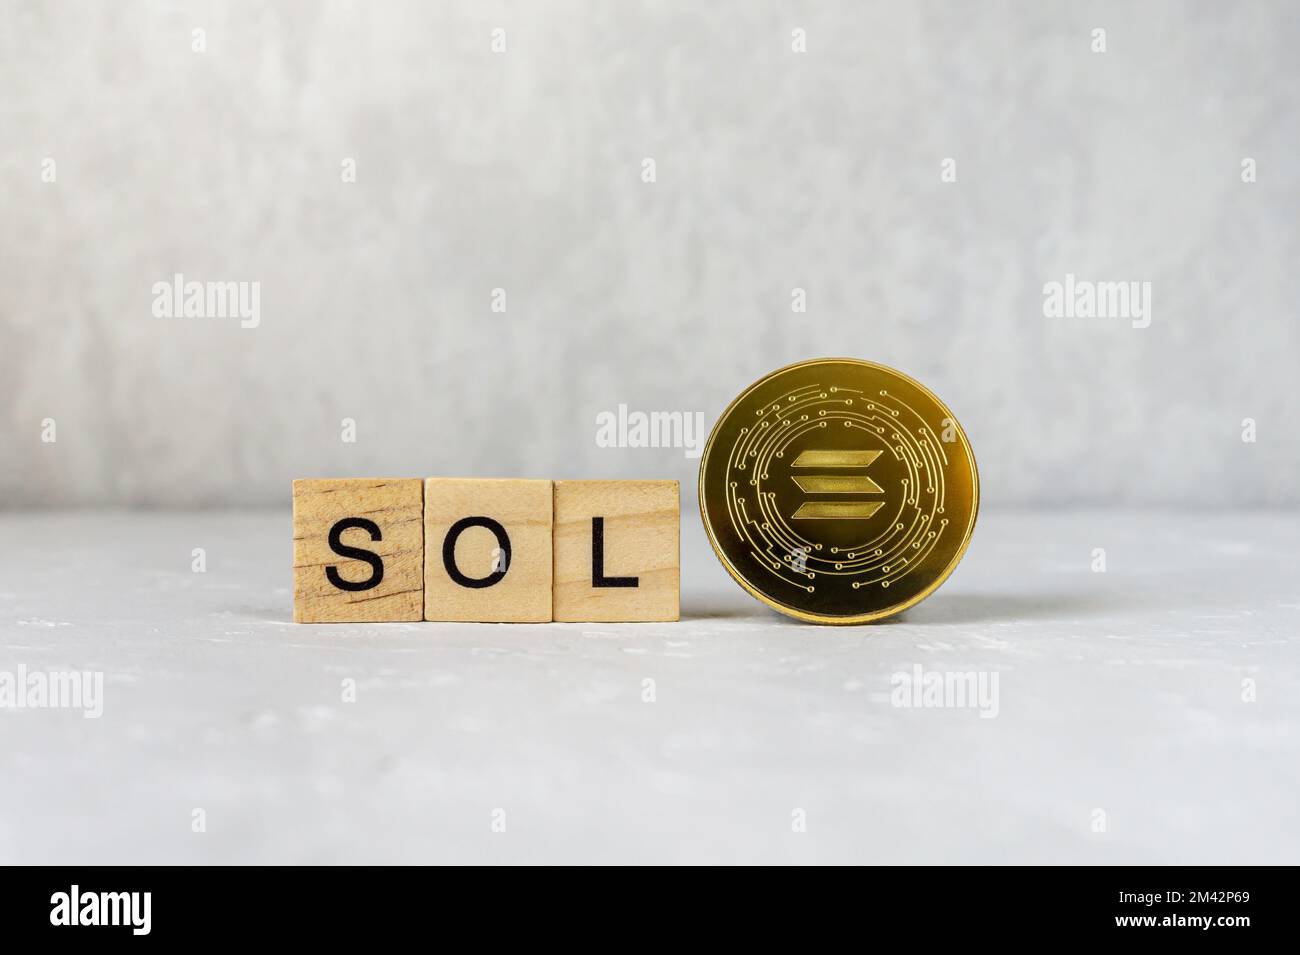 Solana single golden crypto coin with SOL text on wooden tiles. Stock Photo